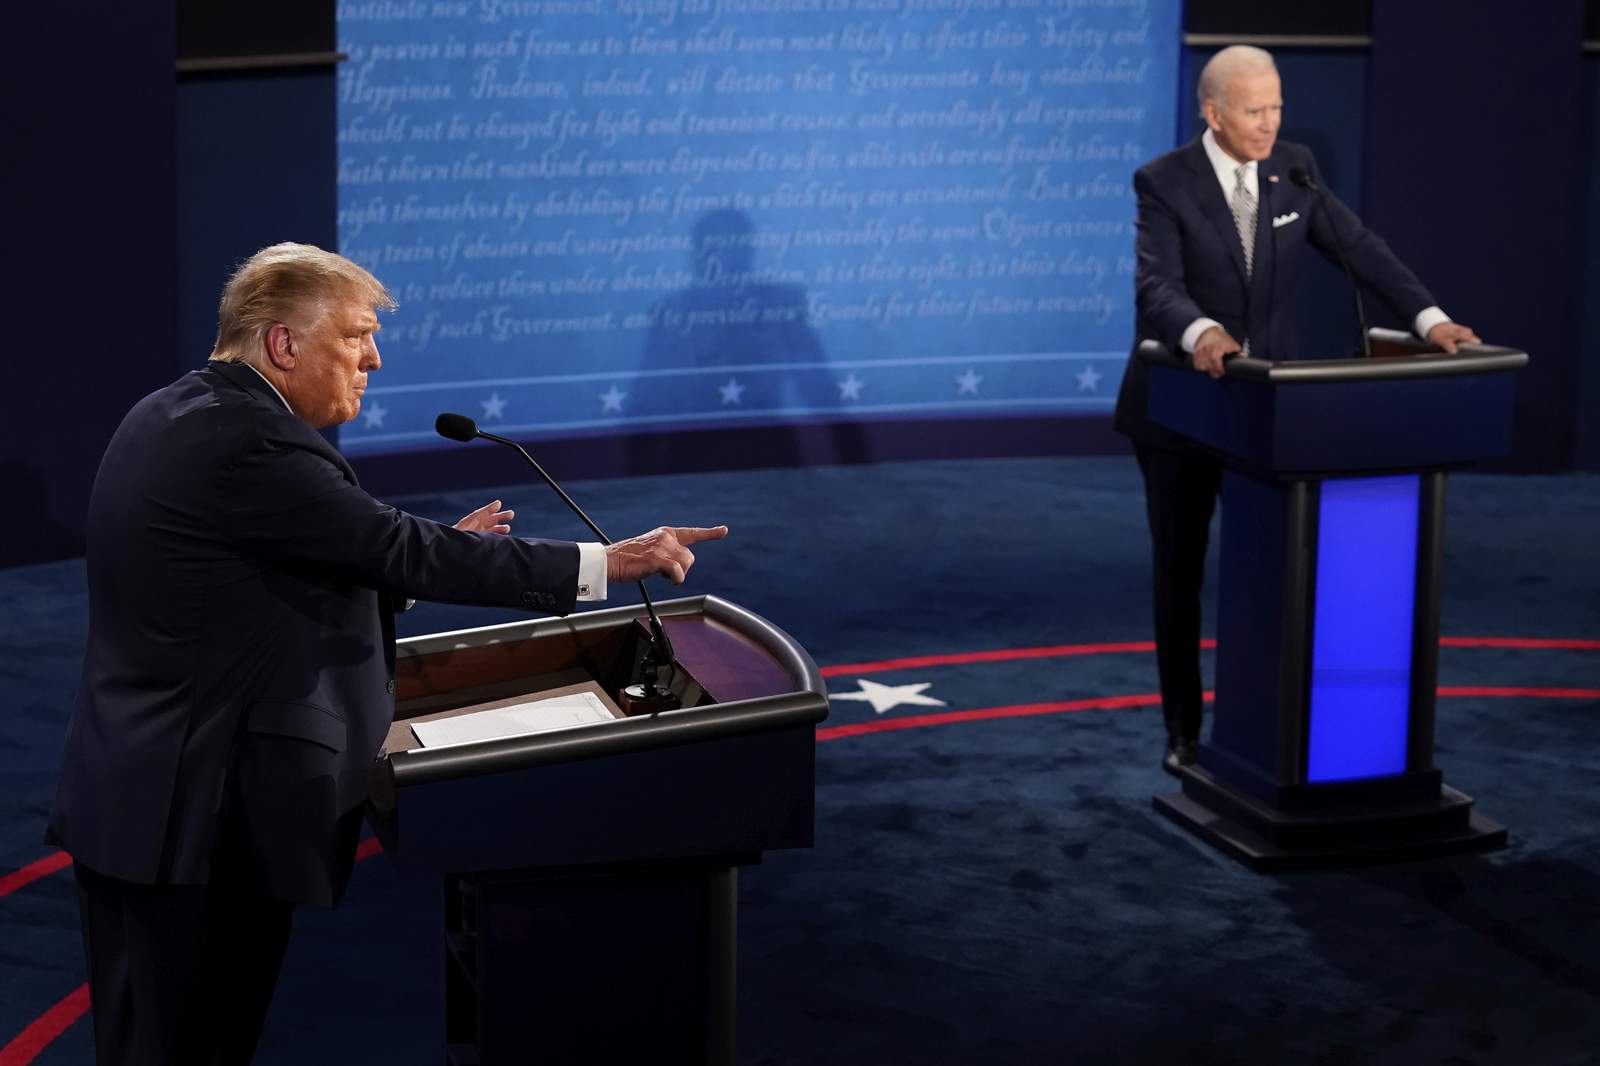 Donald Trump and Joe Biden stand behind their respective podiums during the recent US presidential debate. Trump is speaking and pointing while Biden is standing with his hands gripping the podium. They are both looking at the moderator who is outside of the frame. 